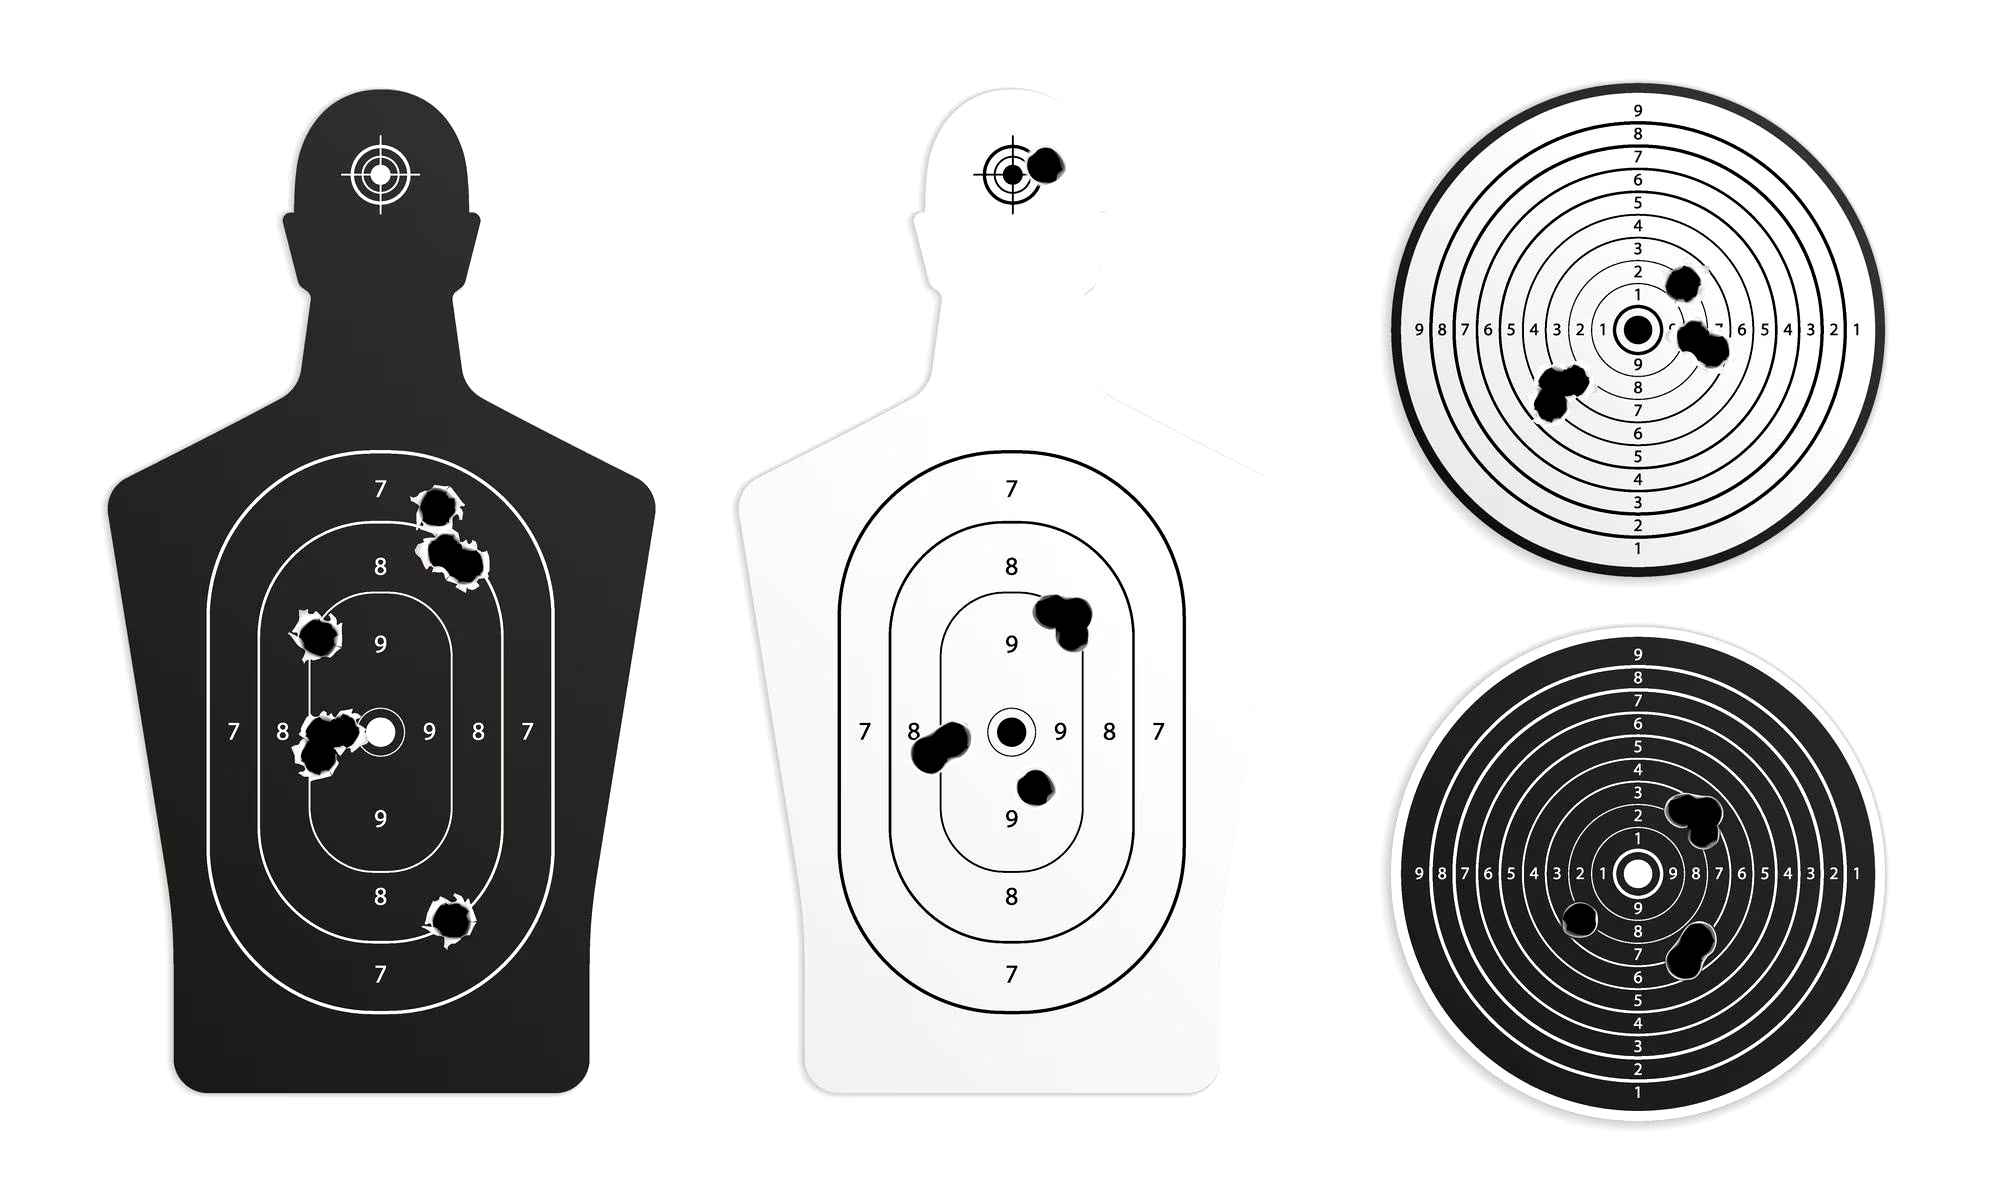 Airsoft targets